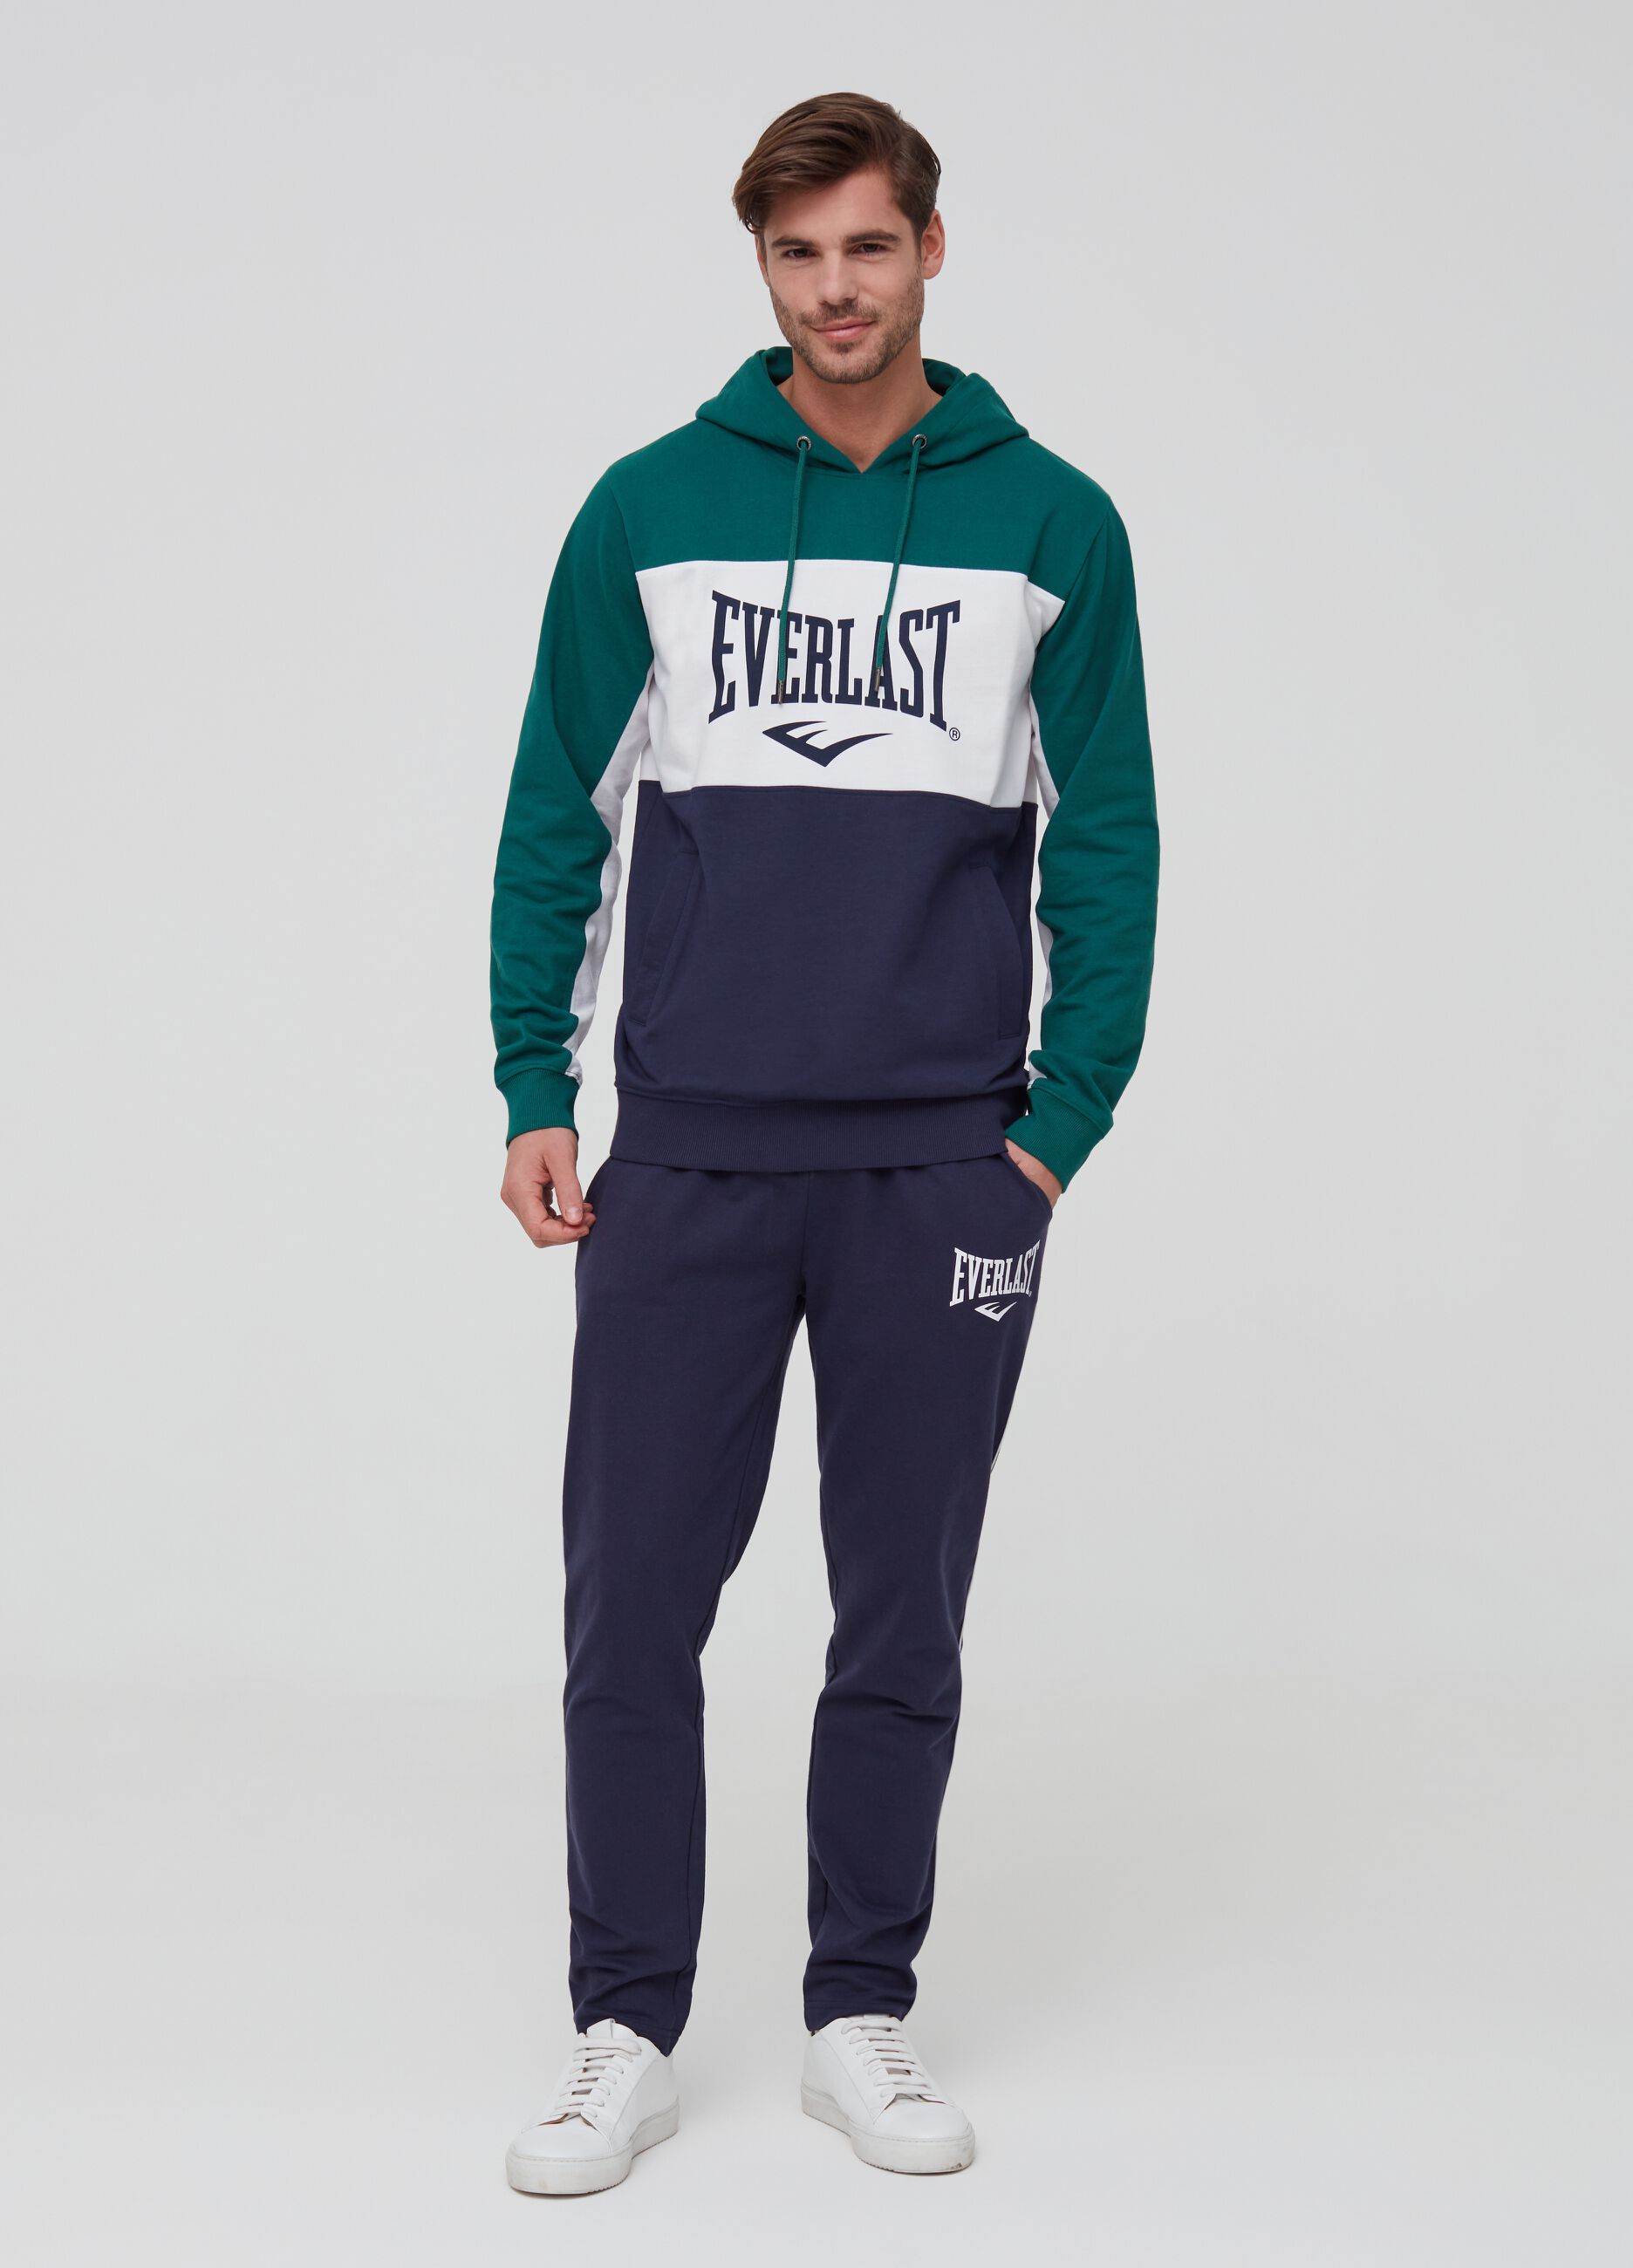 Everlast jogger with pockets